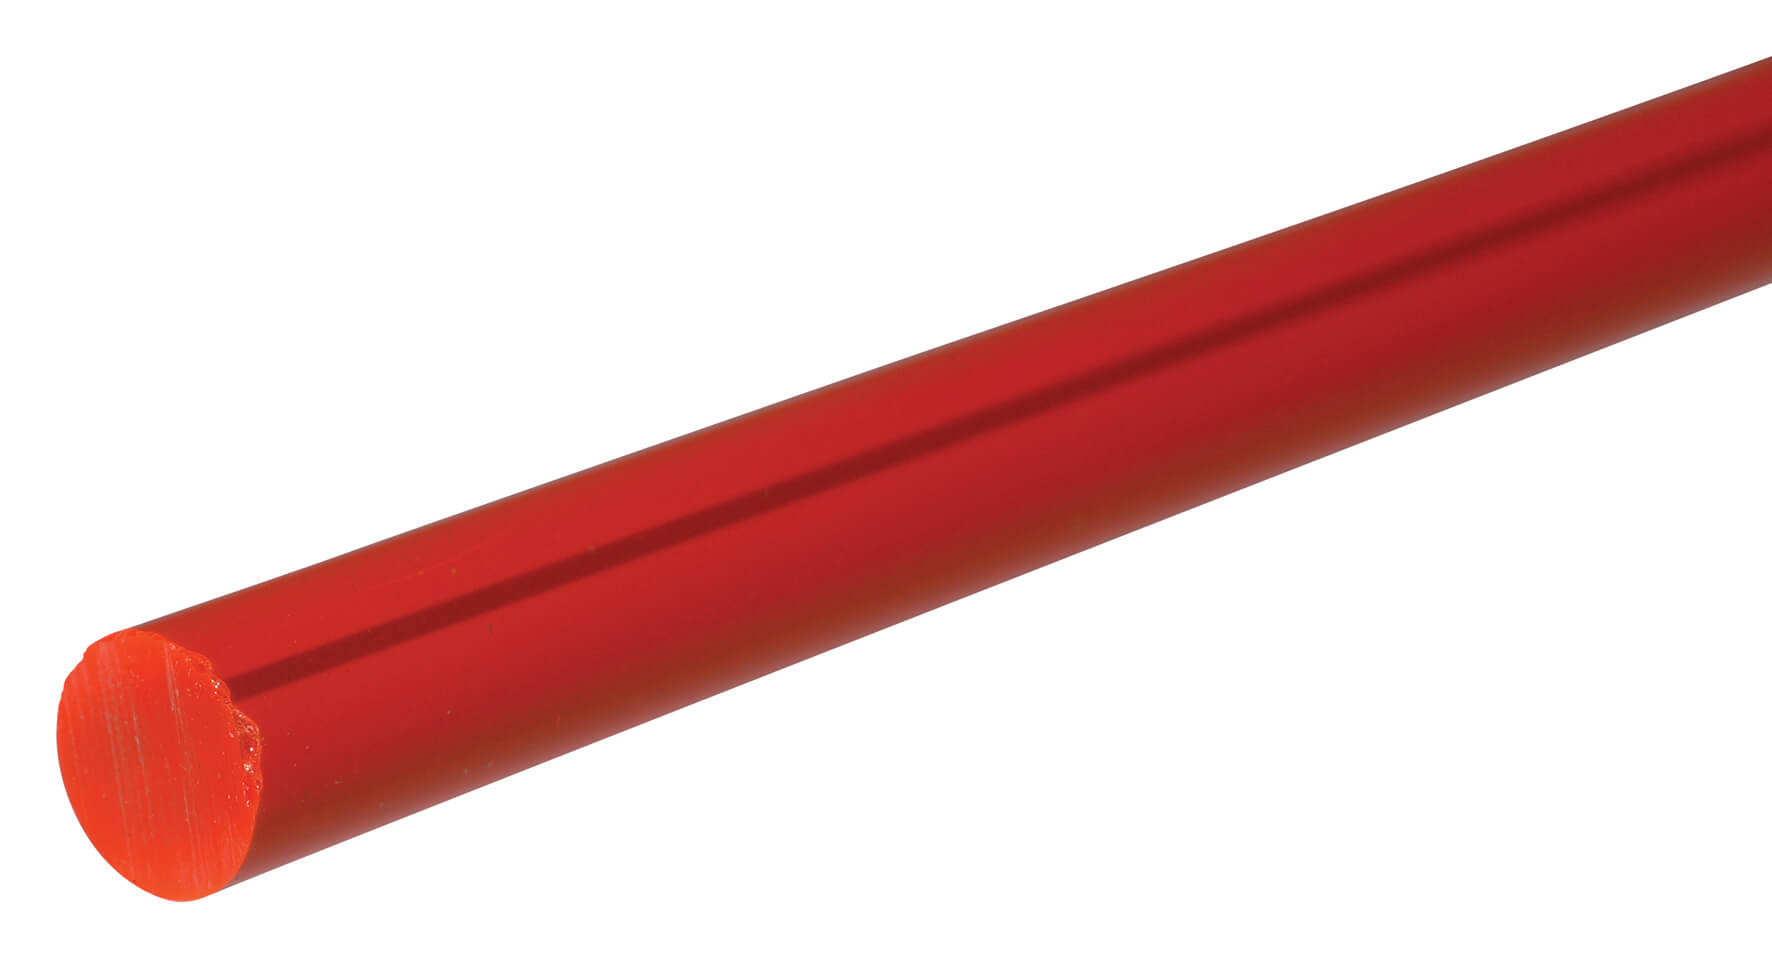 Fluorescent Acrylic Rod 6mm x 500mm - Red